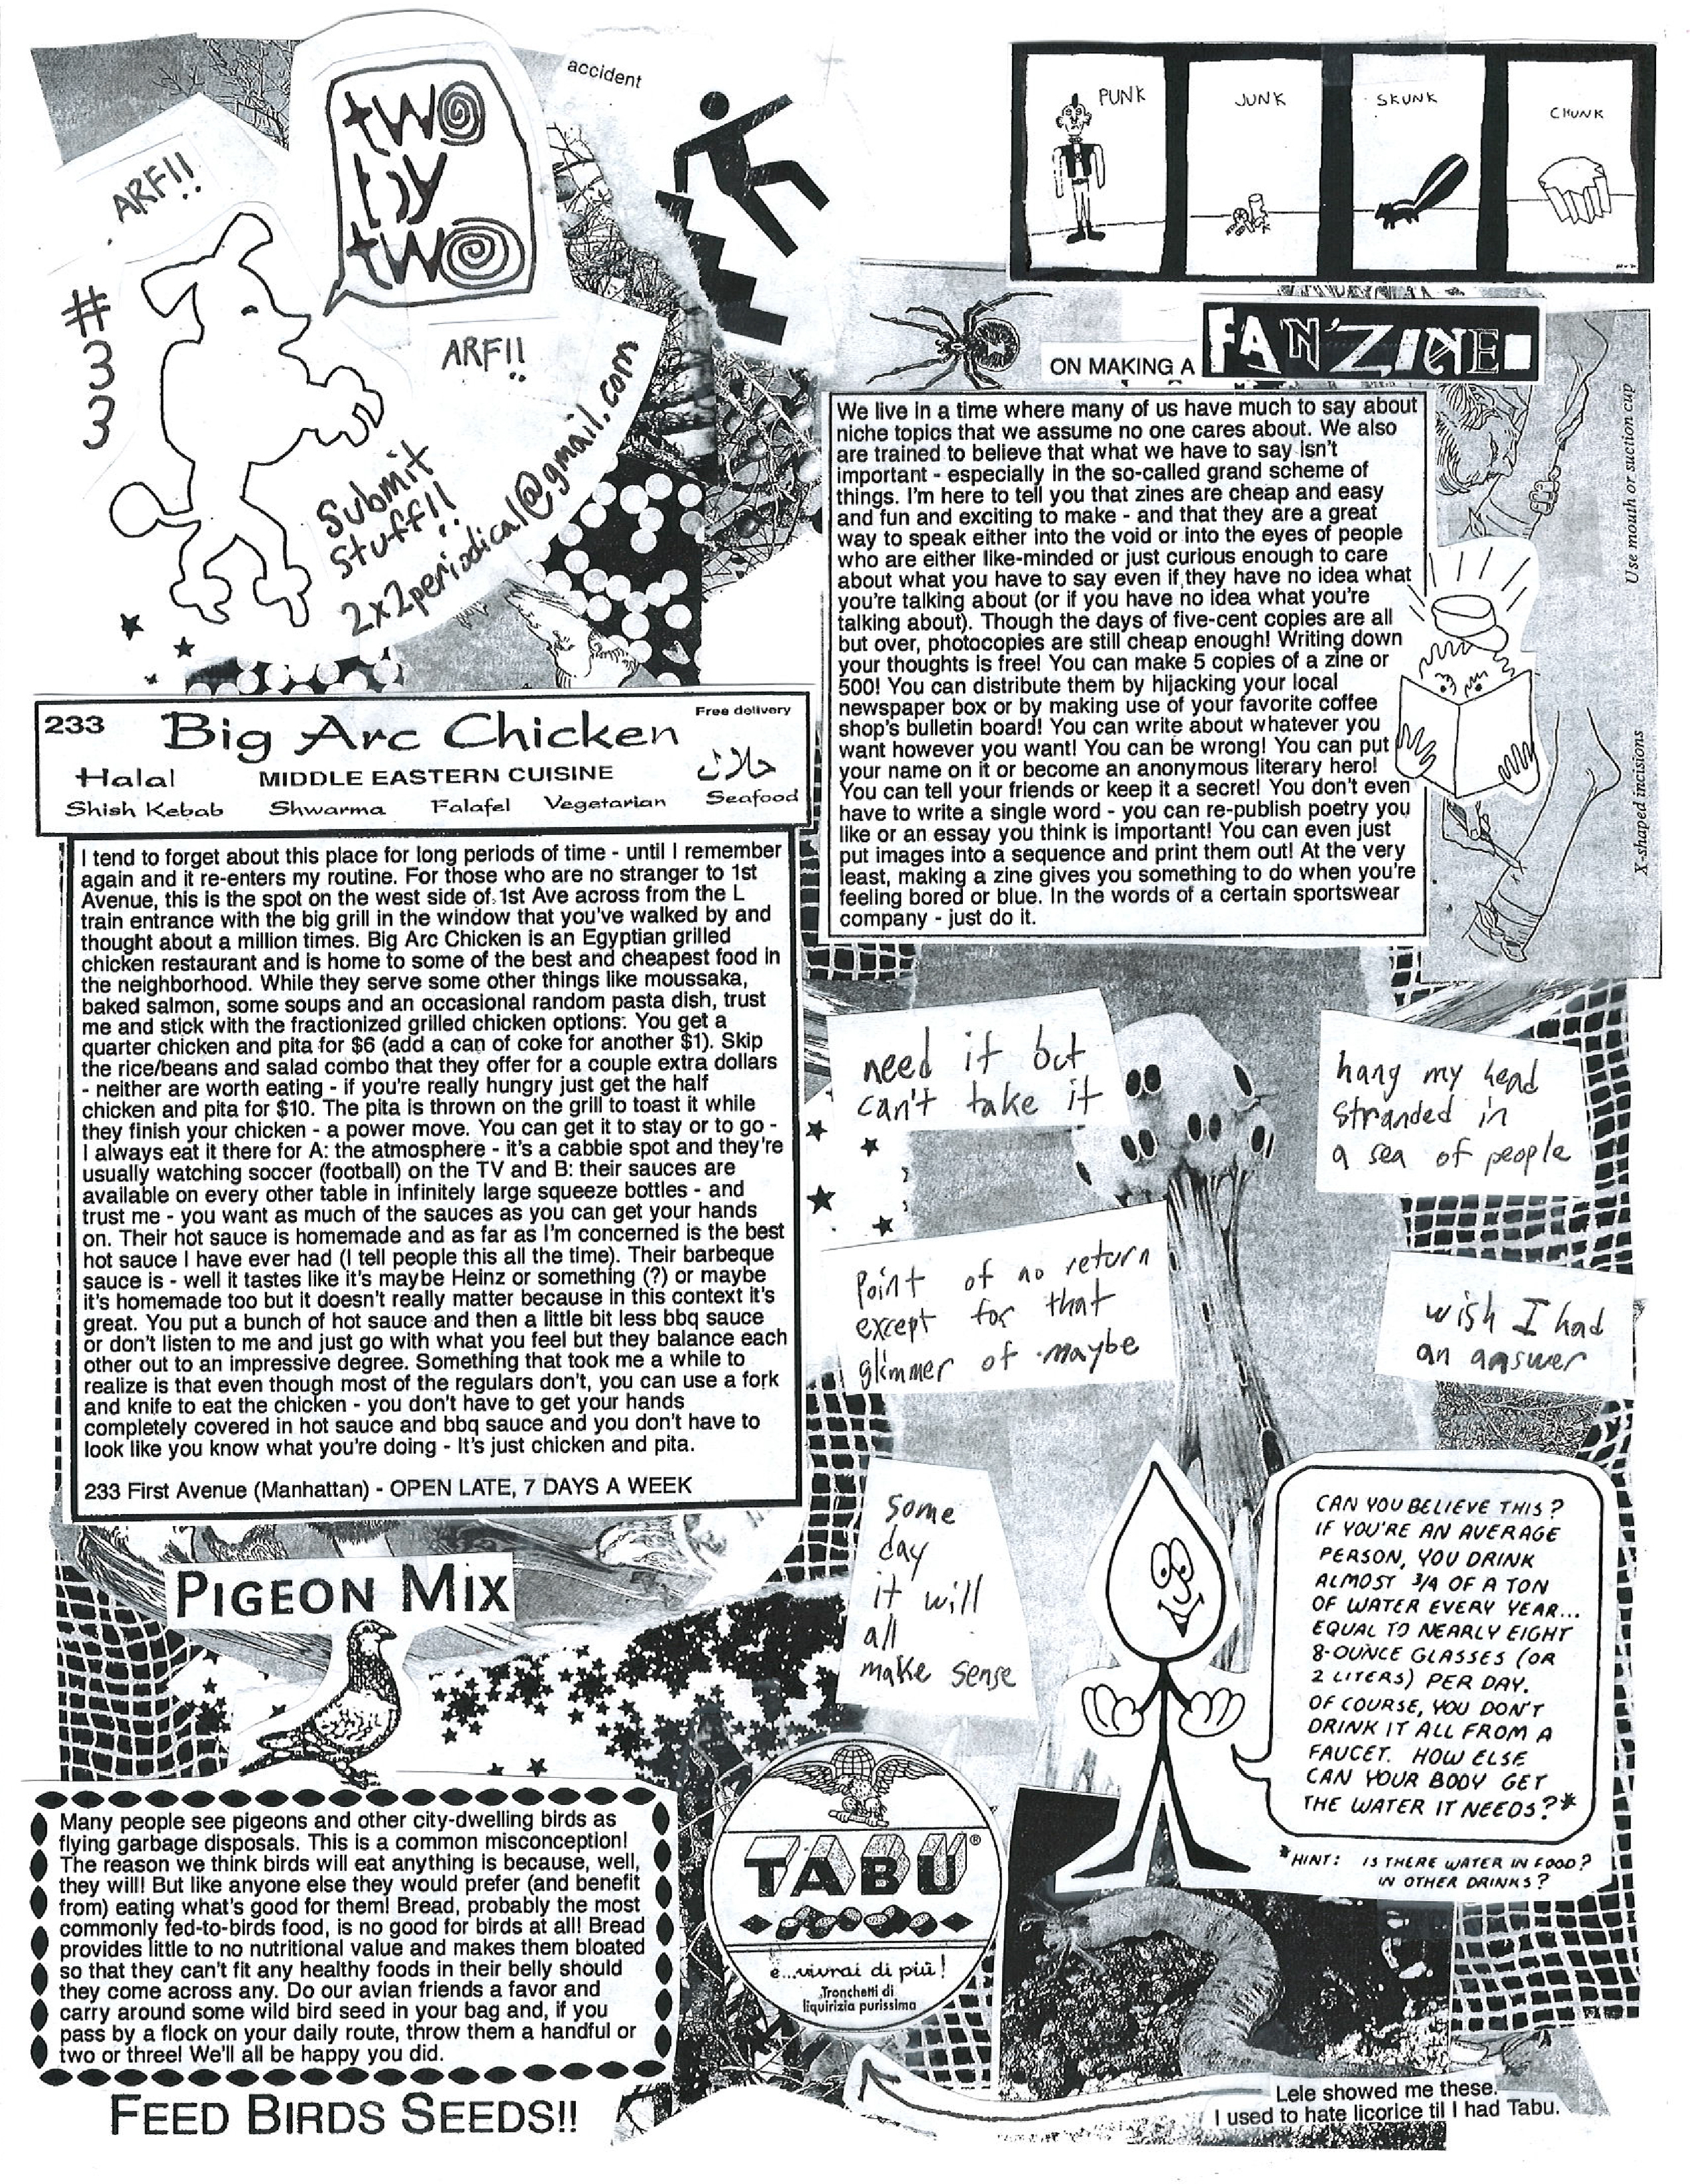 Page 1 of 2x2 issue 33. It is a collage of black and white drawings, photos, scribblings, etc. and includes notes about making a fanzine, and Big Arc Chicken, water, licorice, and pigeon mix. 